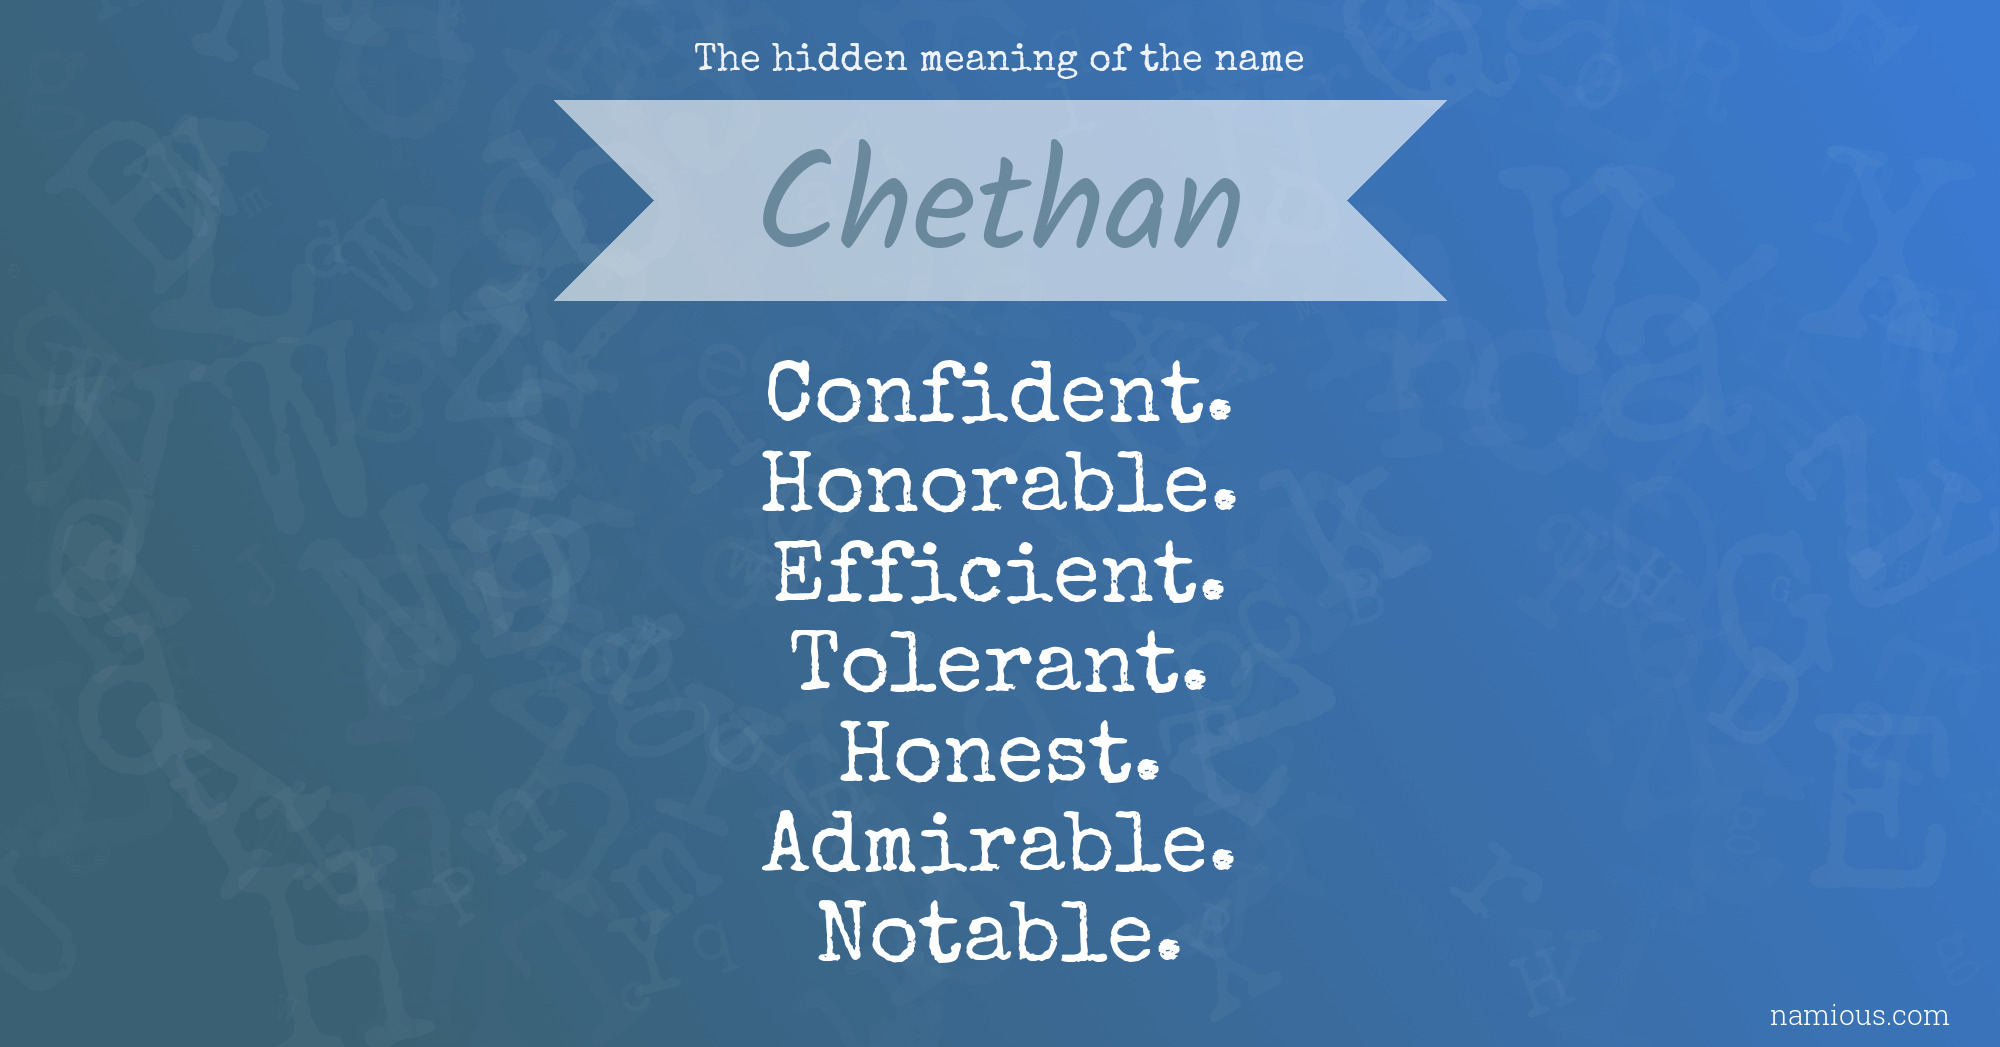 The hidden meaning of the name Chethan